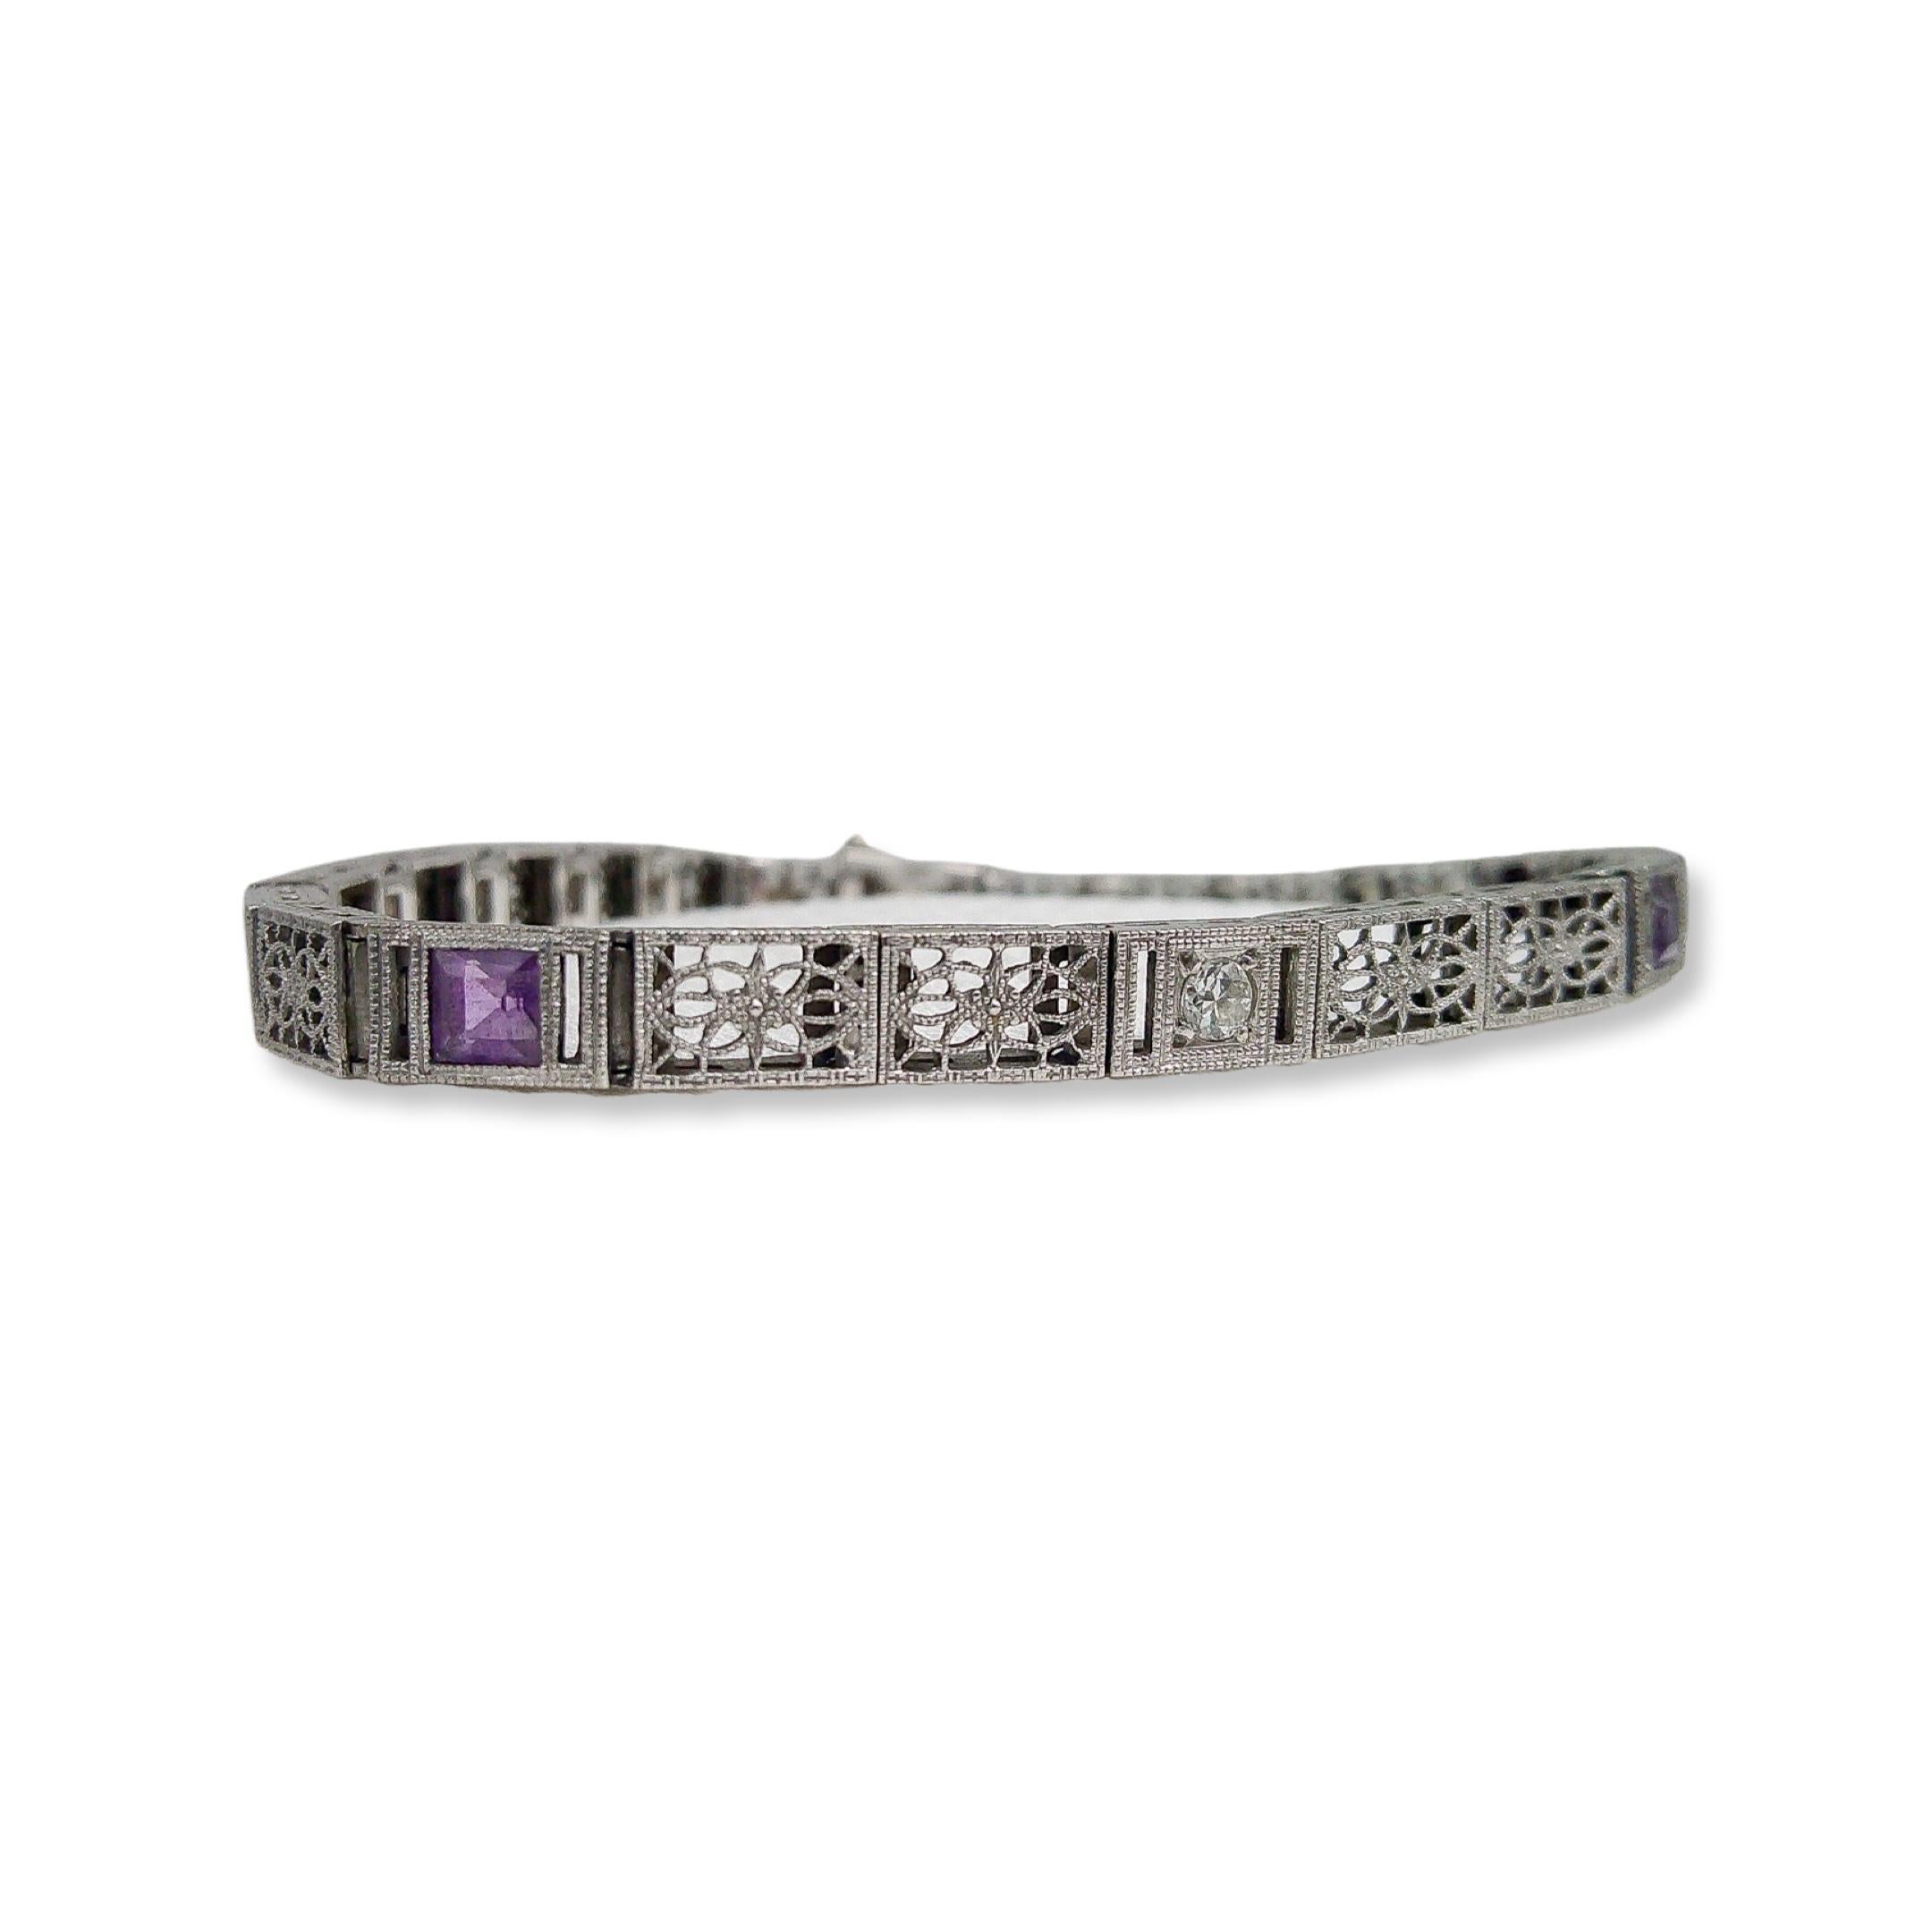 This antique piece was handcrafted sometime during the Art Deco design period (1920-1940). At the heart of this majestic bracelet sits a dazzling diamond, framed by two spellbinding amethysts. These exquisite violet gems not only add a celestial